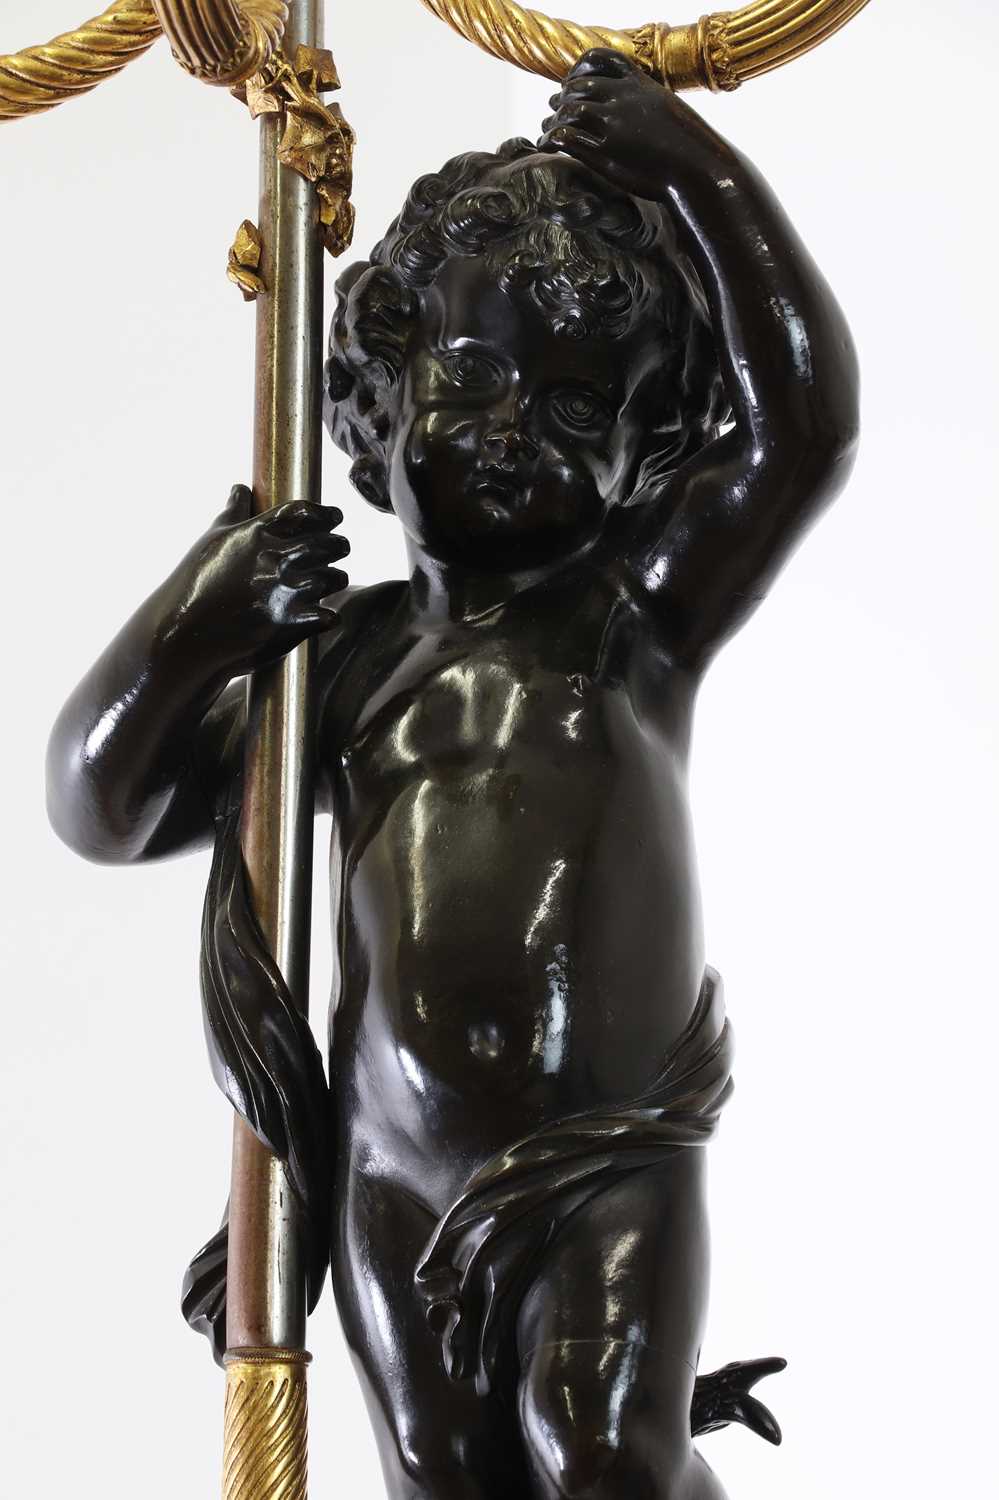 A pair of French Empire bronze and marble candelabra attributed to François Rémond (c.1747-1812), - Image 8 of 23